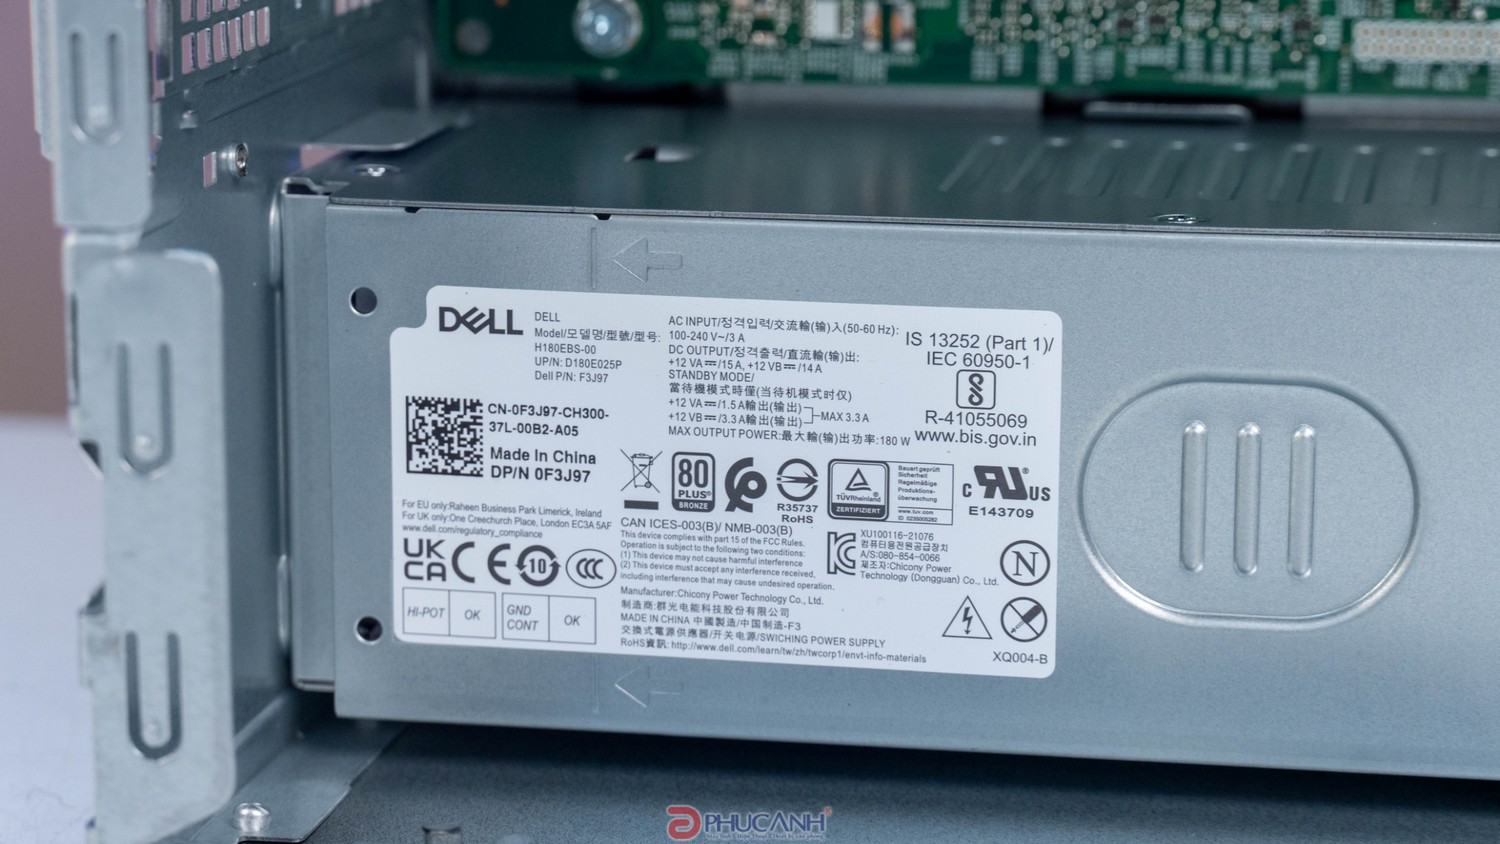  review Dell OptiPlex Tower 7010